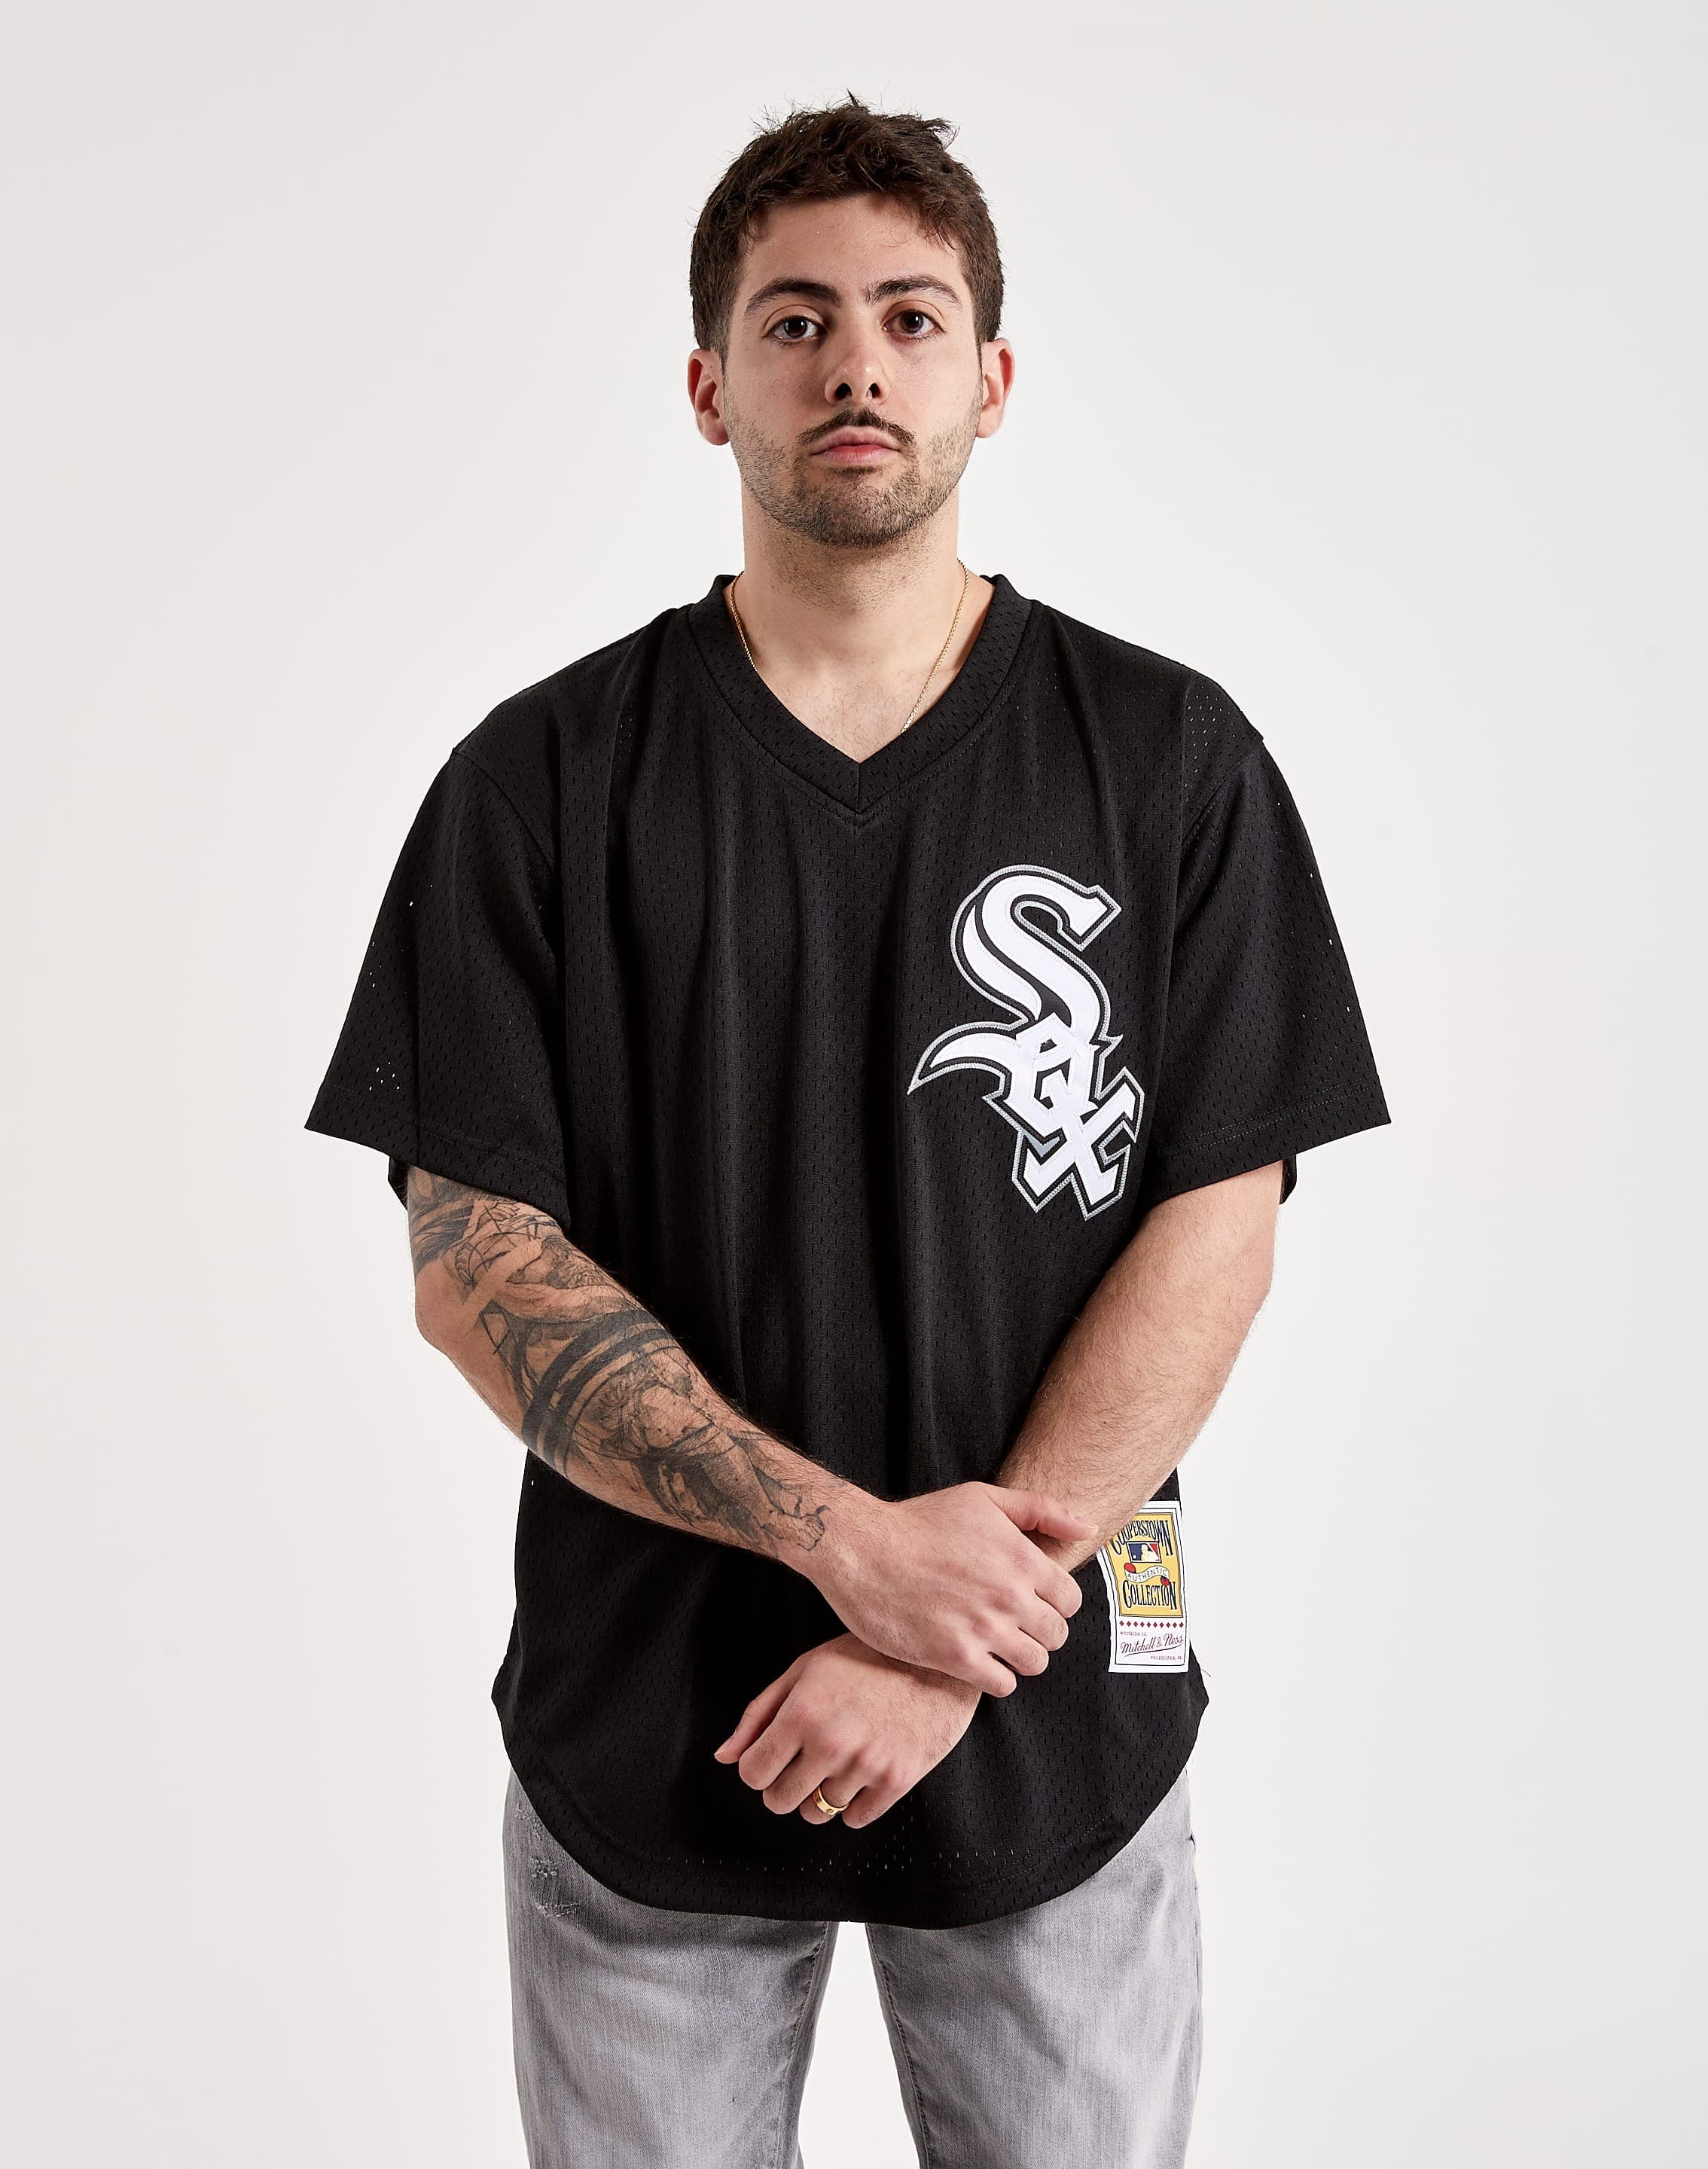 Men's Chicago White Sox Nike Authentic Road Jersey | Grandstand Ltd.